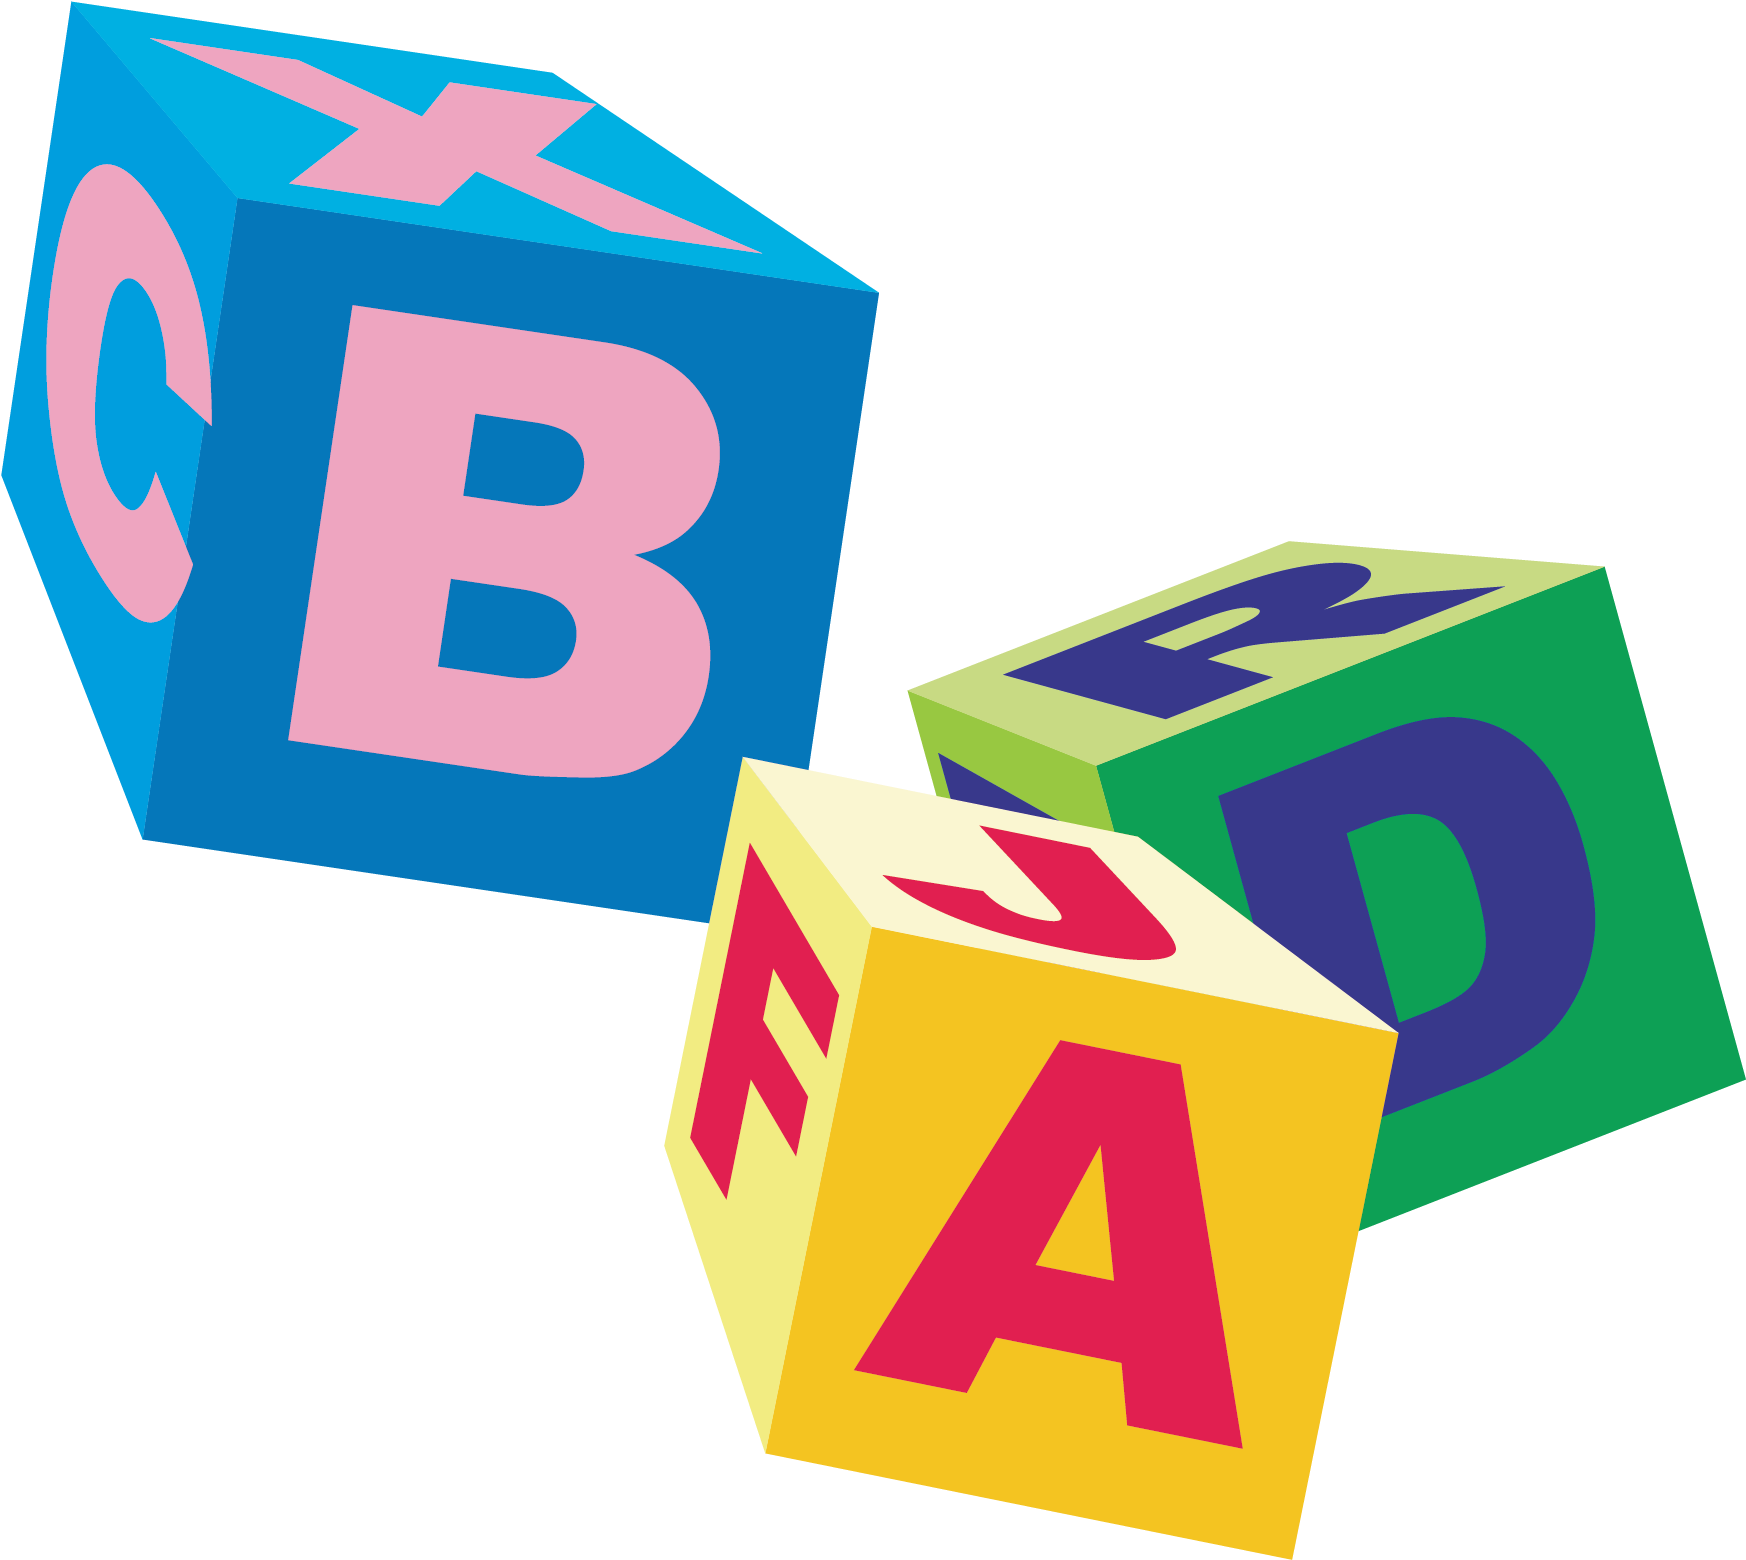 A Colorful Cubes With Letters On Them